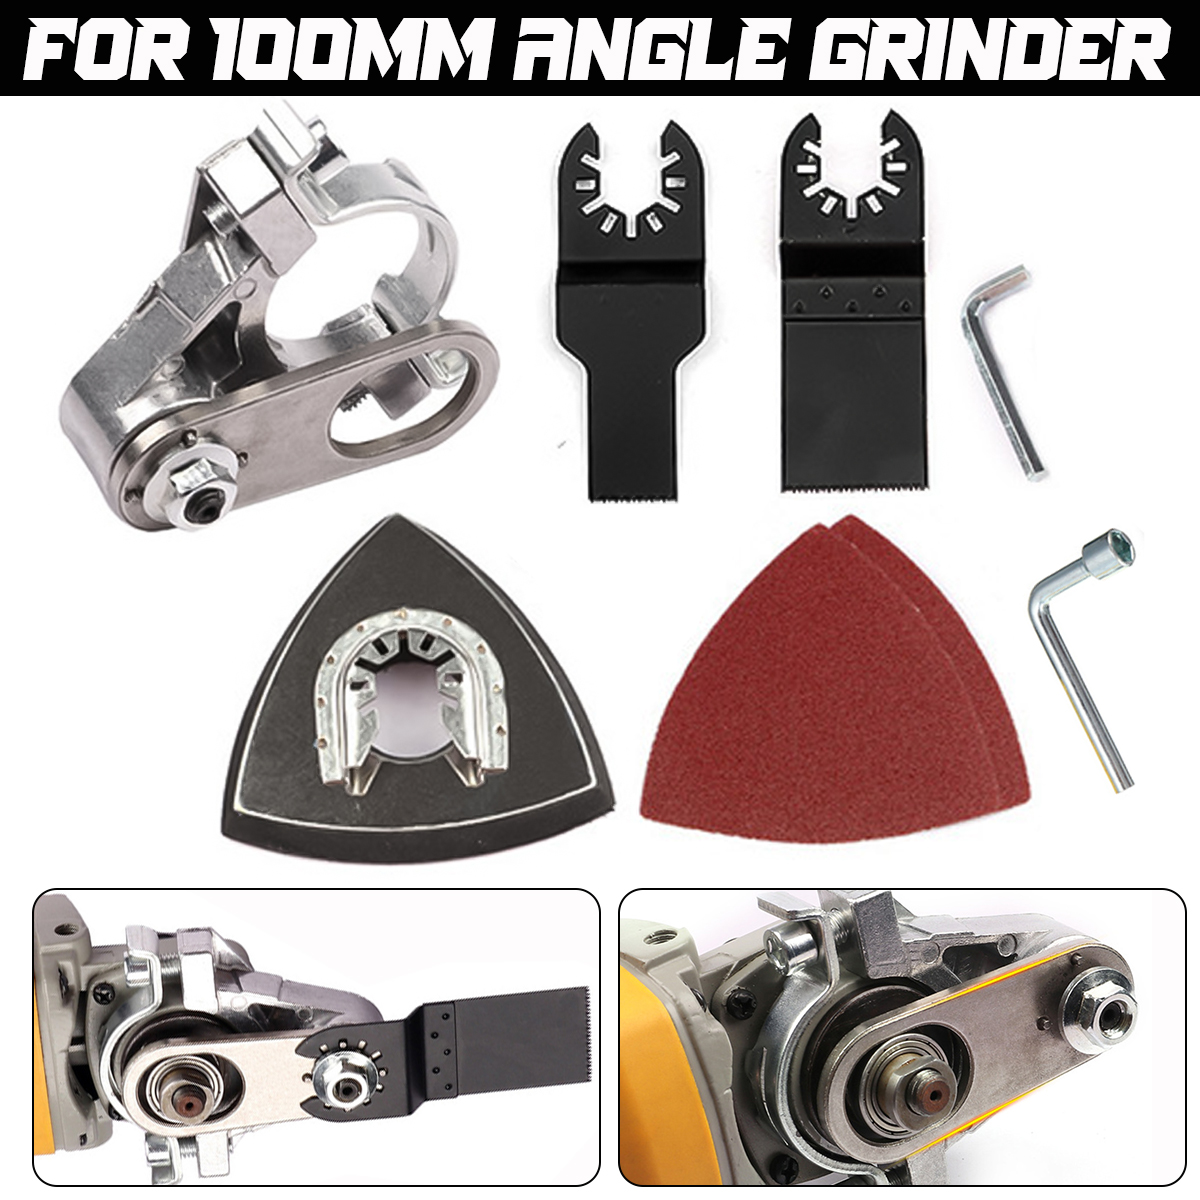 Cordless-Oscillating-Multi-Tool-Angle-Grinder-Conversion-Tool-Head-For-100mm-Angle-Grinder-1897823-2